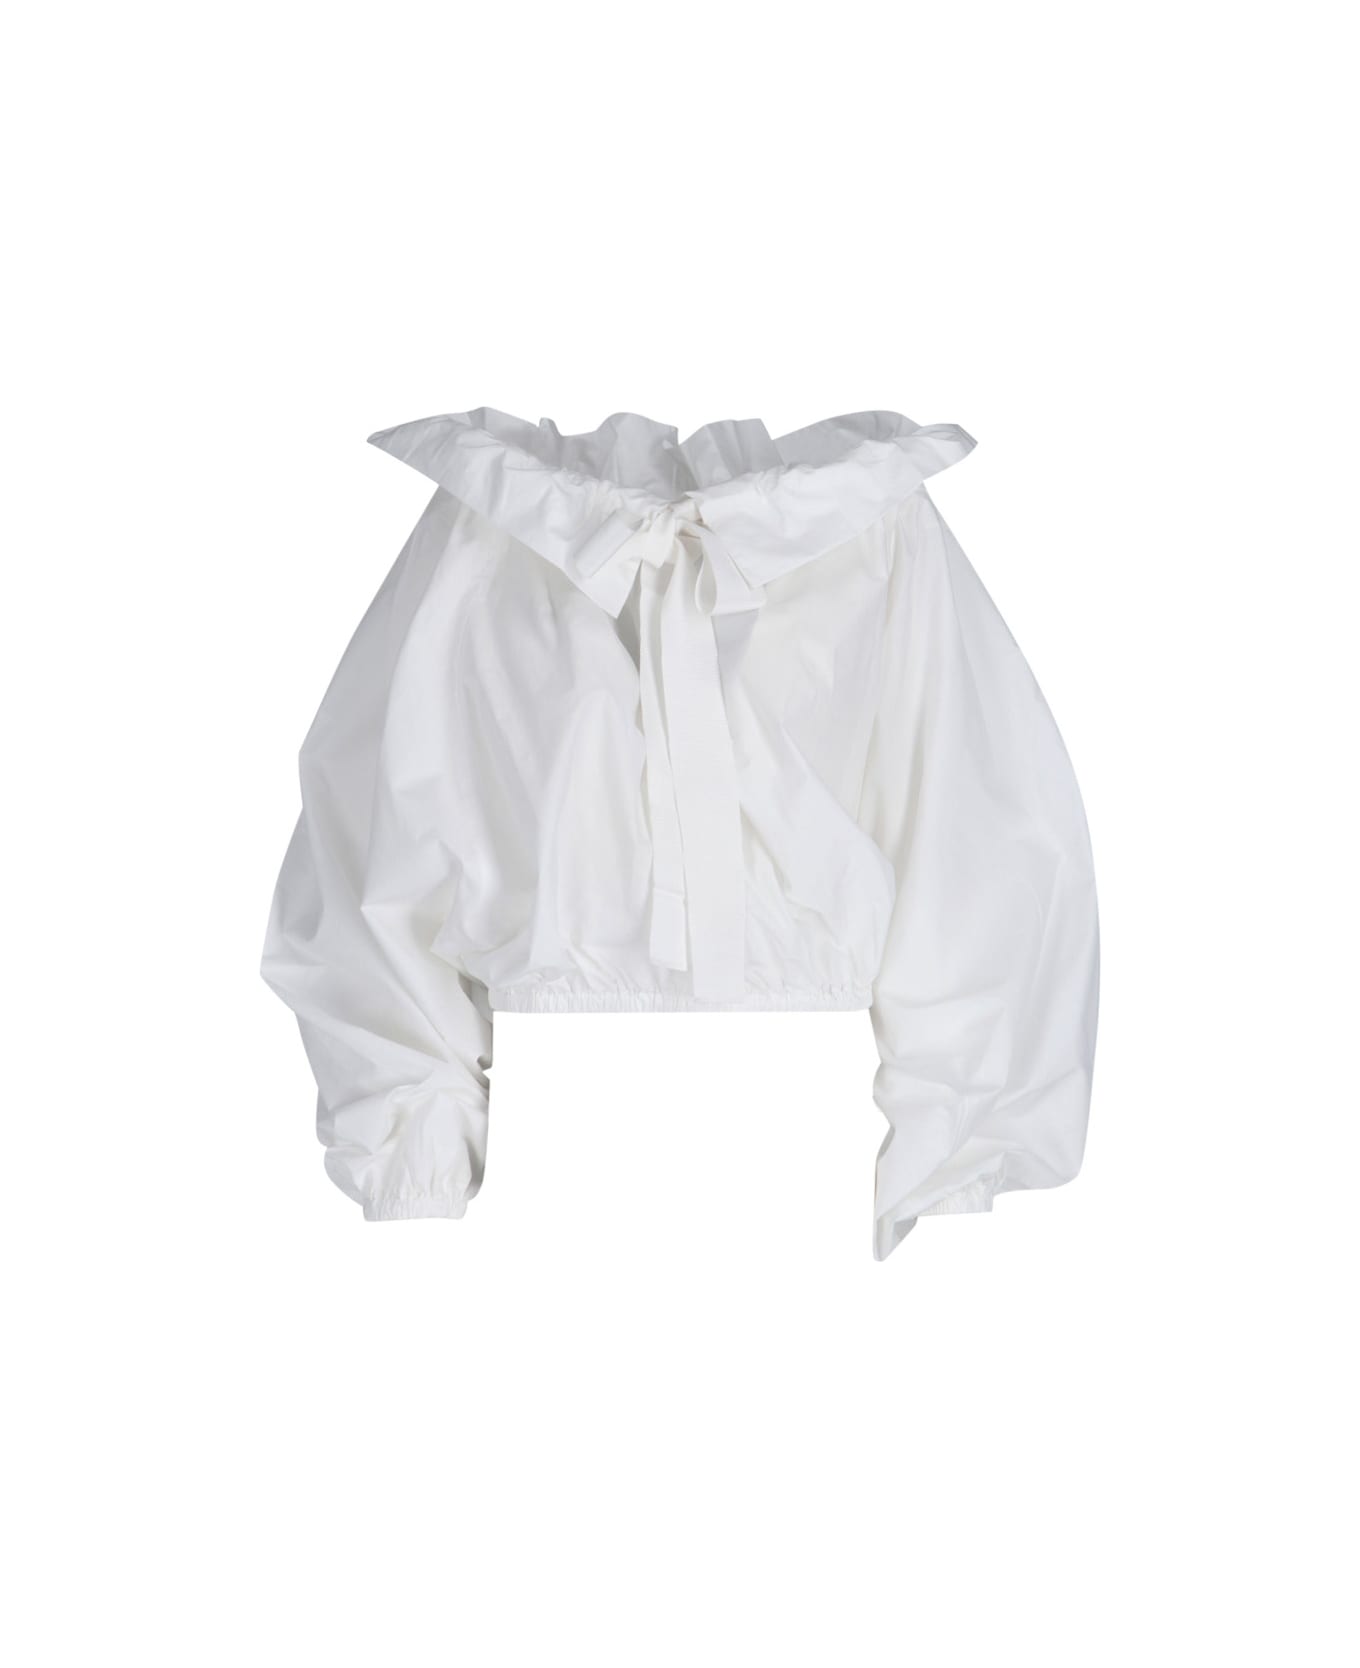 Patou Puff Sleeve Top - White ブラウス